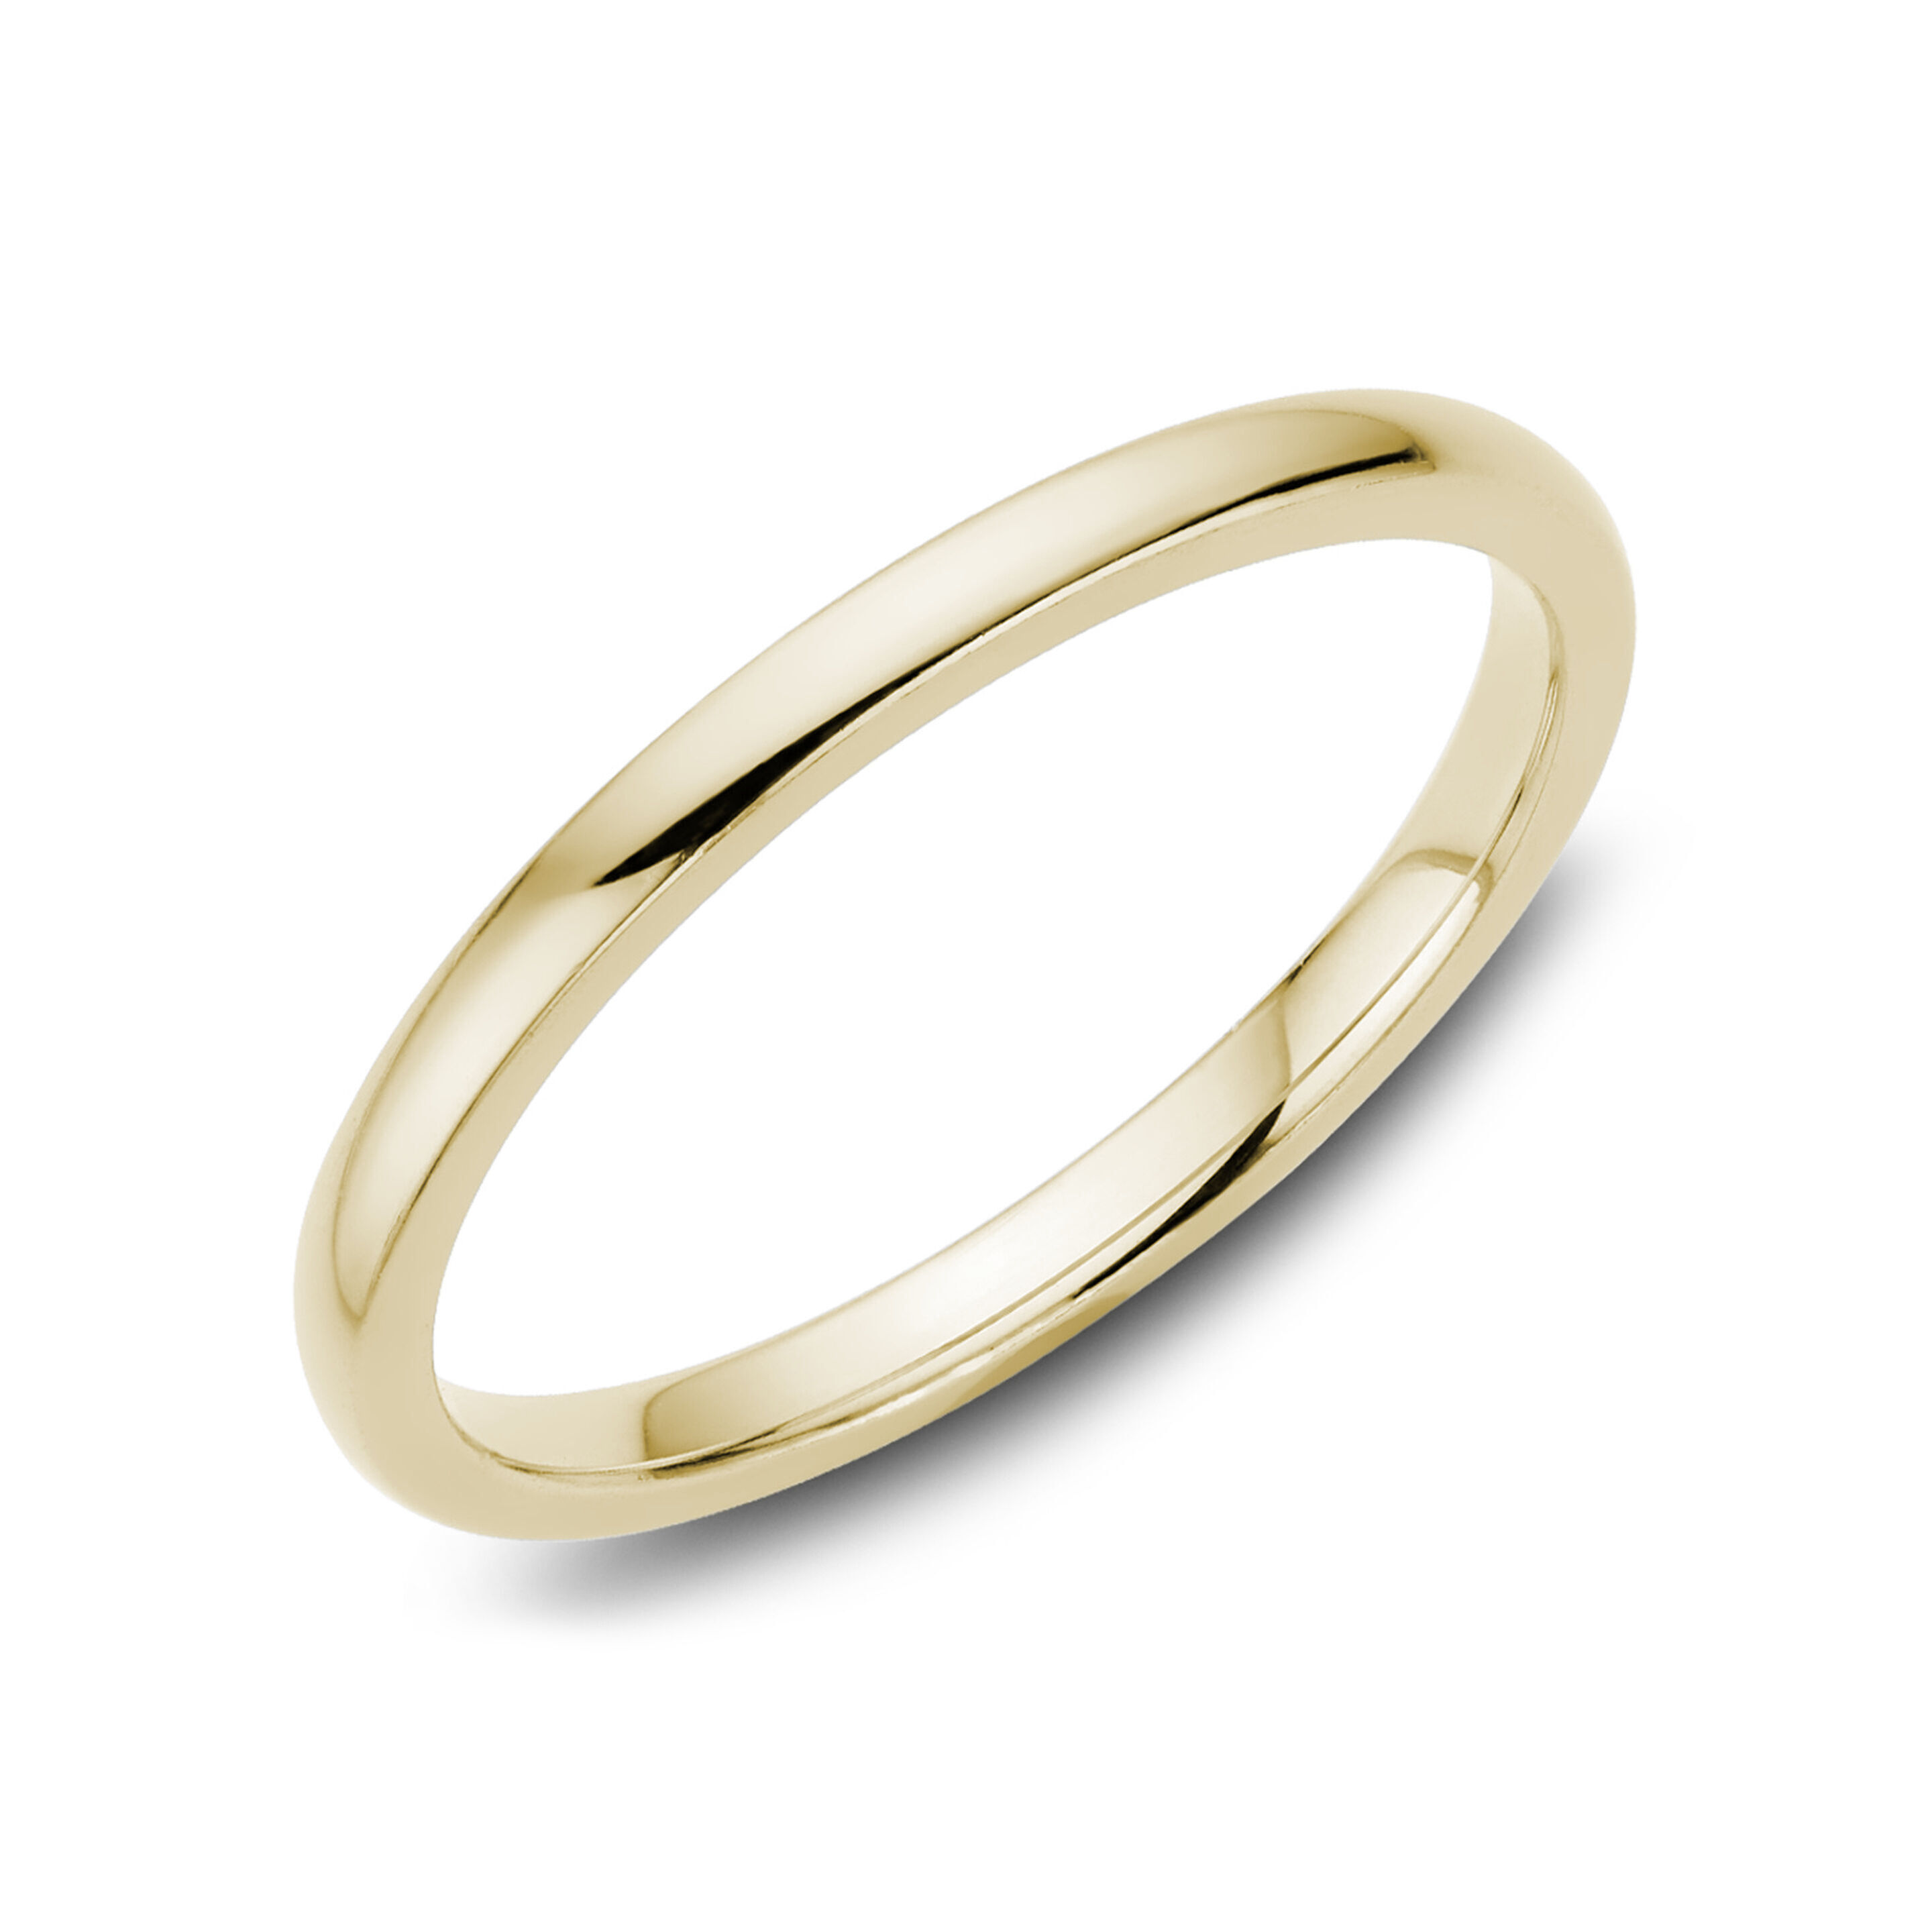 All Wedding Bands Collection | Maison Birks Canada